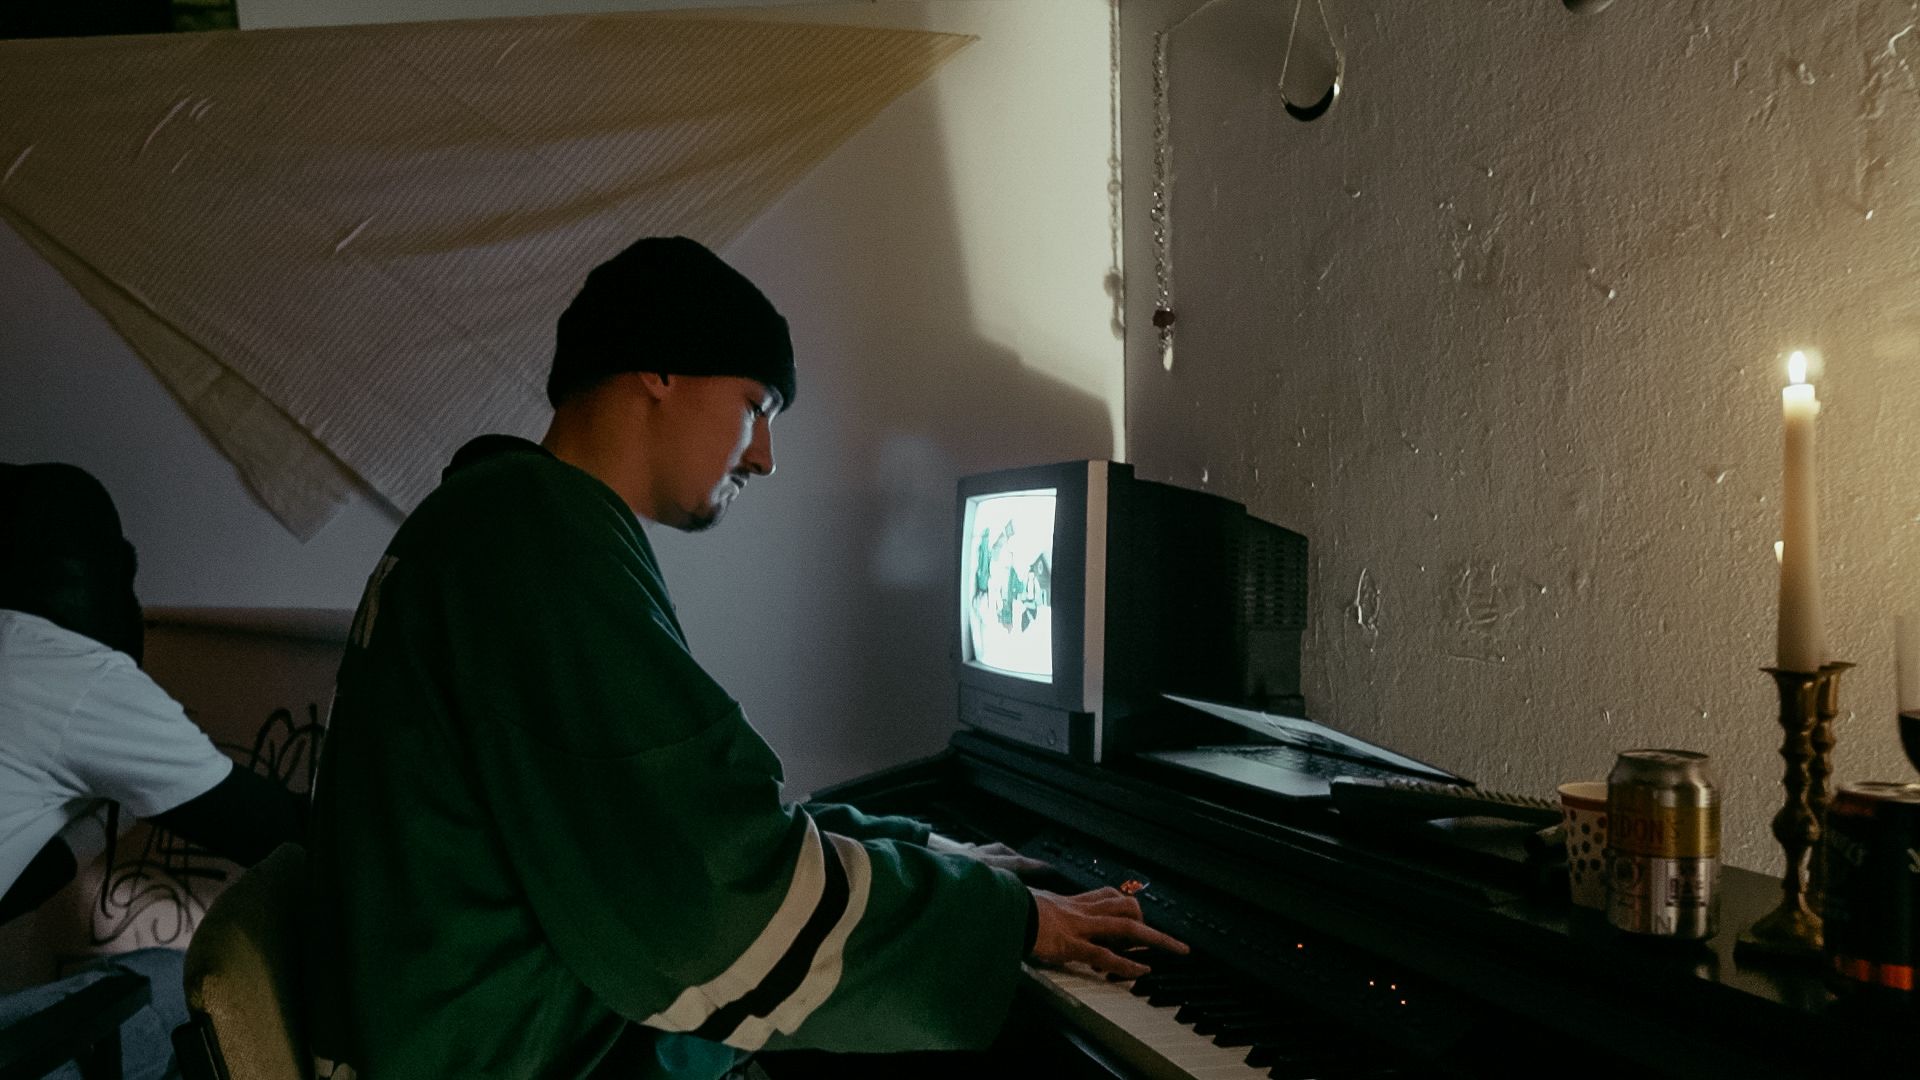 A student plays a piano with a small TV monitor and a lit candlestick on its top